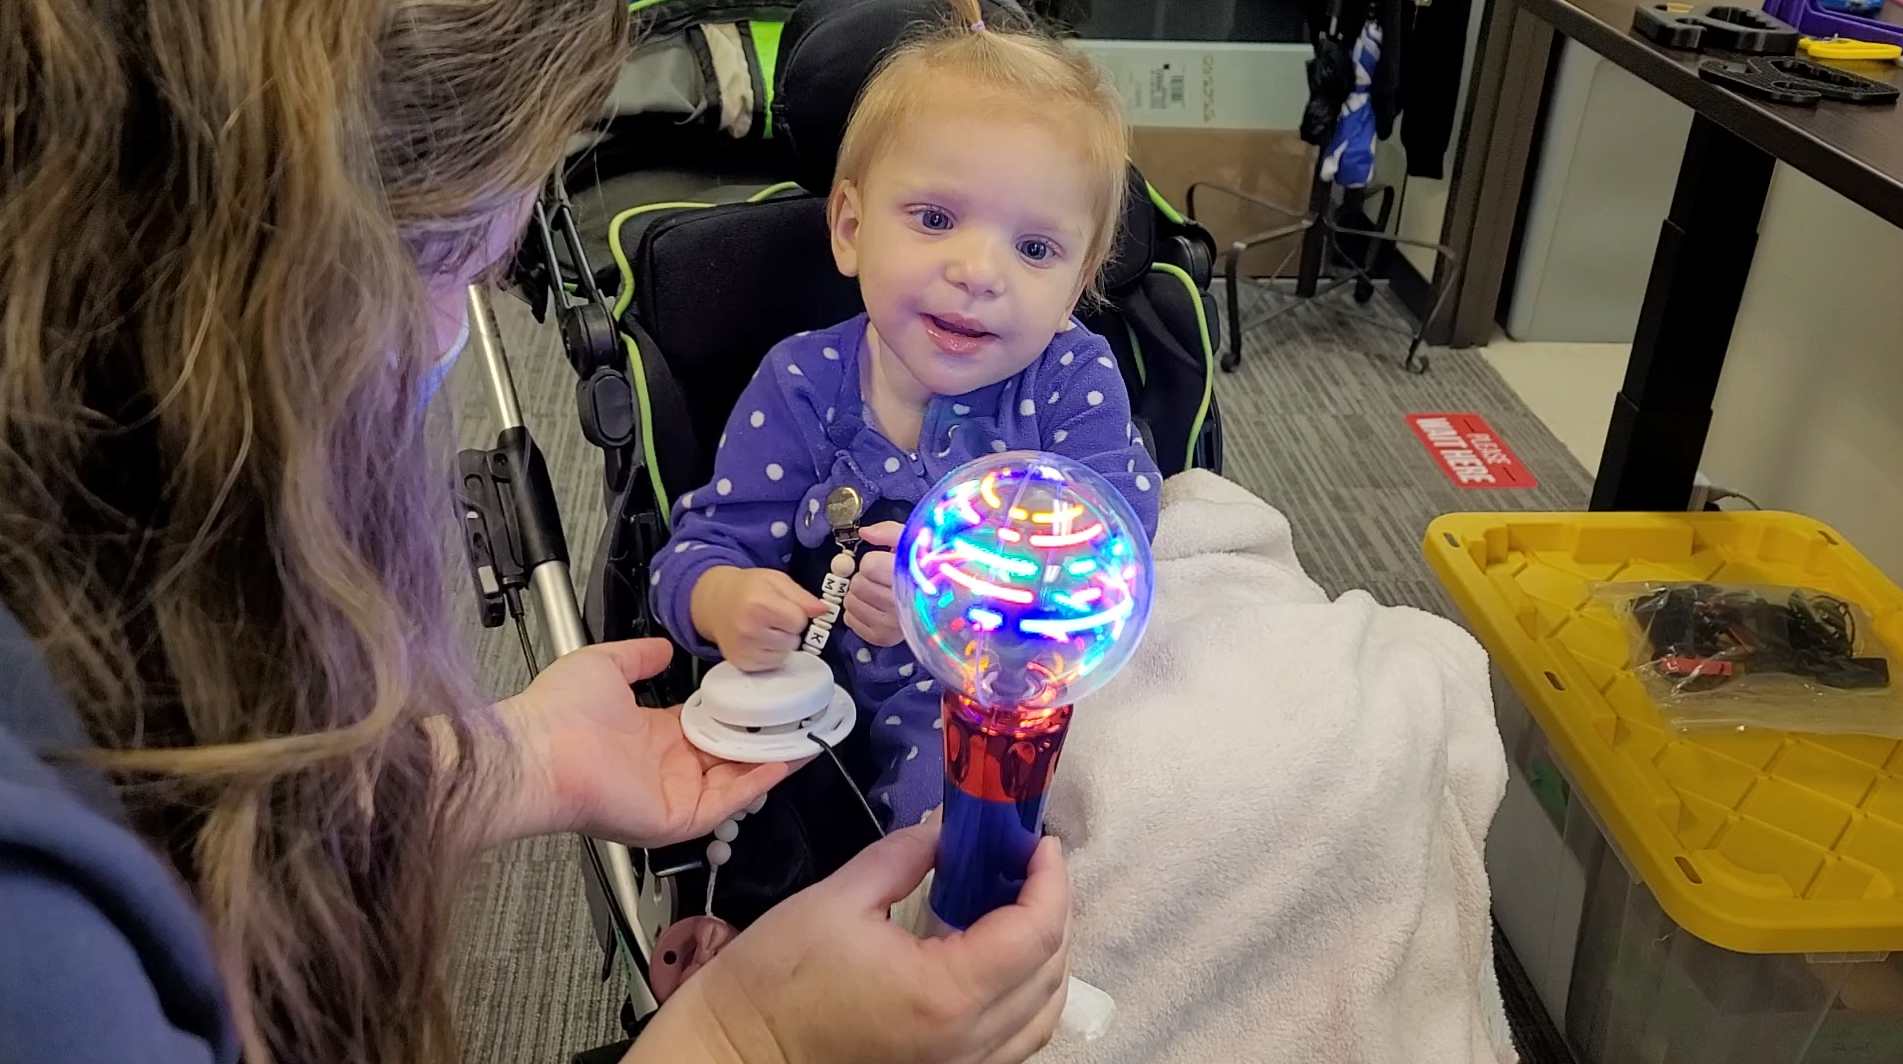 A toddler girl in a stroller playing with a spinning light wand with an assistive switch. The toy and switch is held by her mom on the left